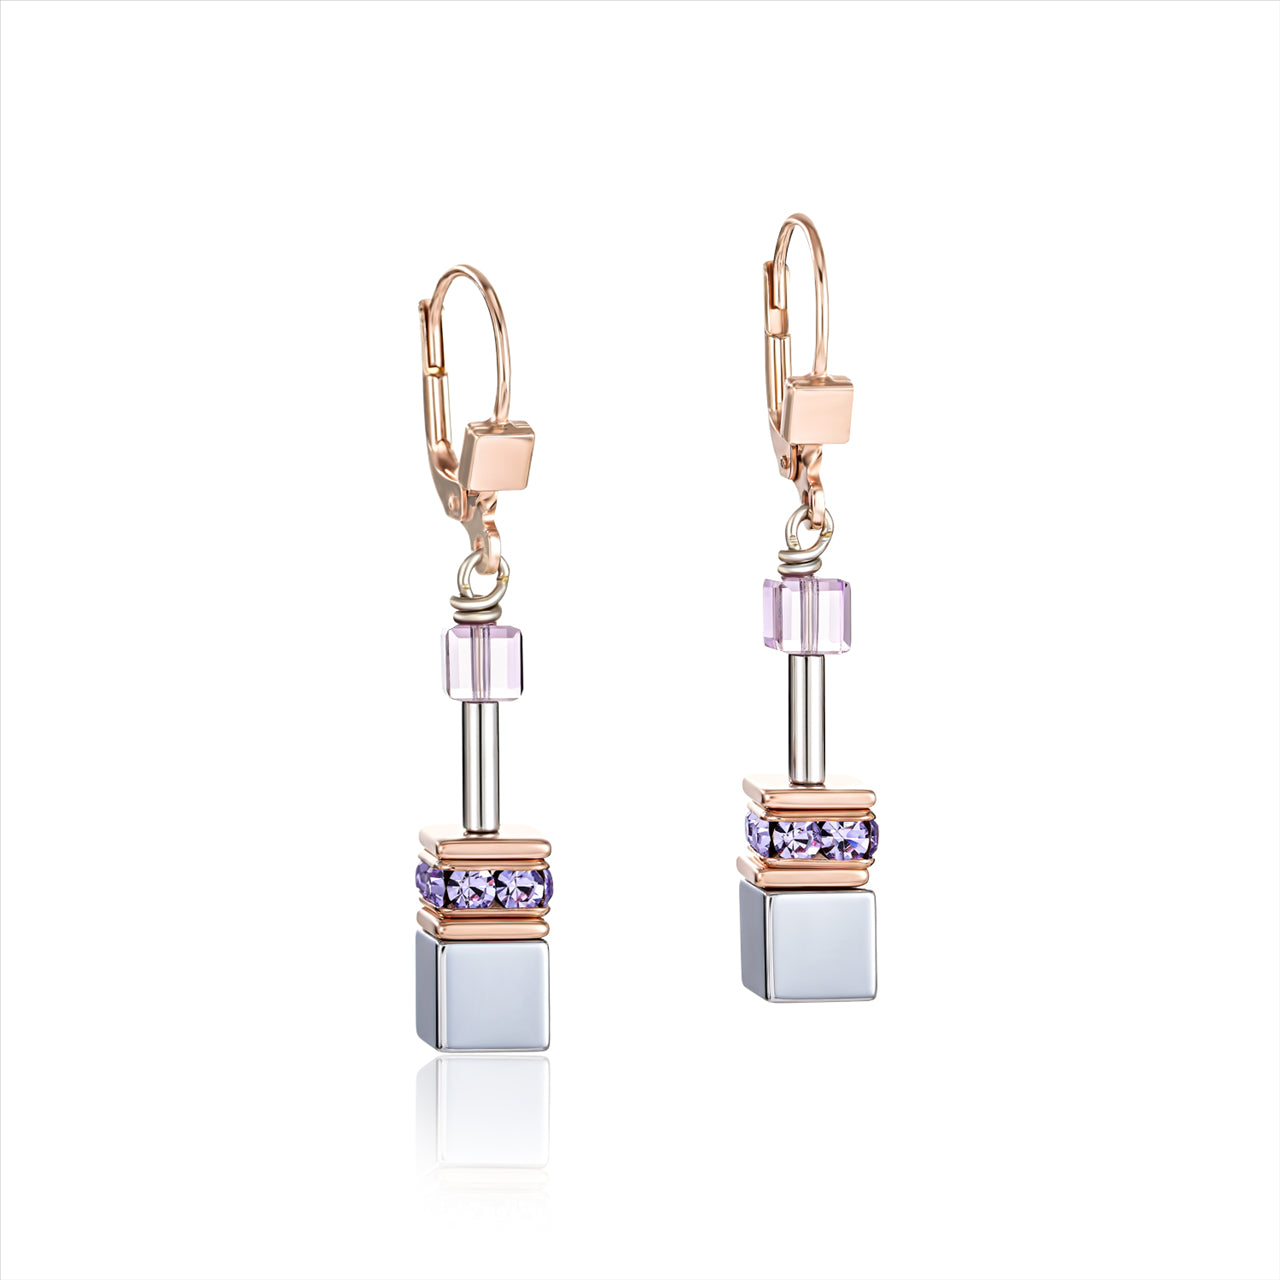 Earrings - CDL - Natural selection-earrings geo-cube rose gold platinum st/stl with Amethyst/ rhinestone, oxide titanium haematite & Swarovski crrystals with sterling silver fittings